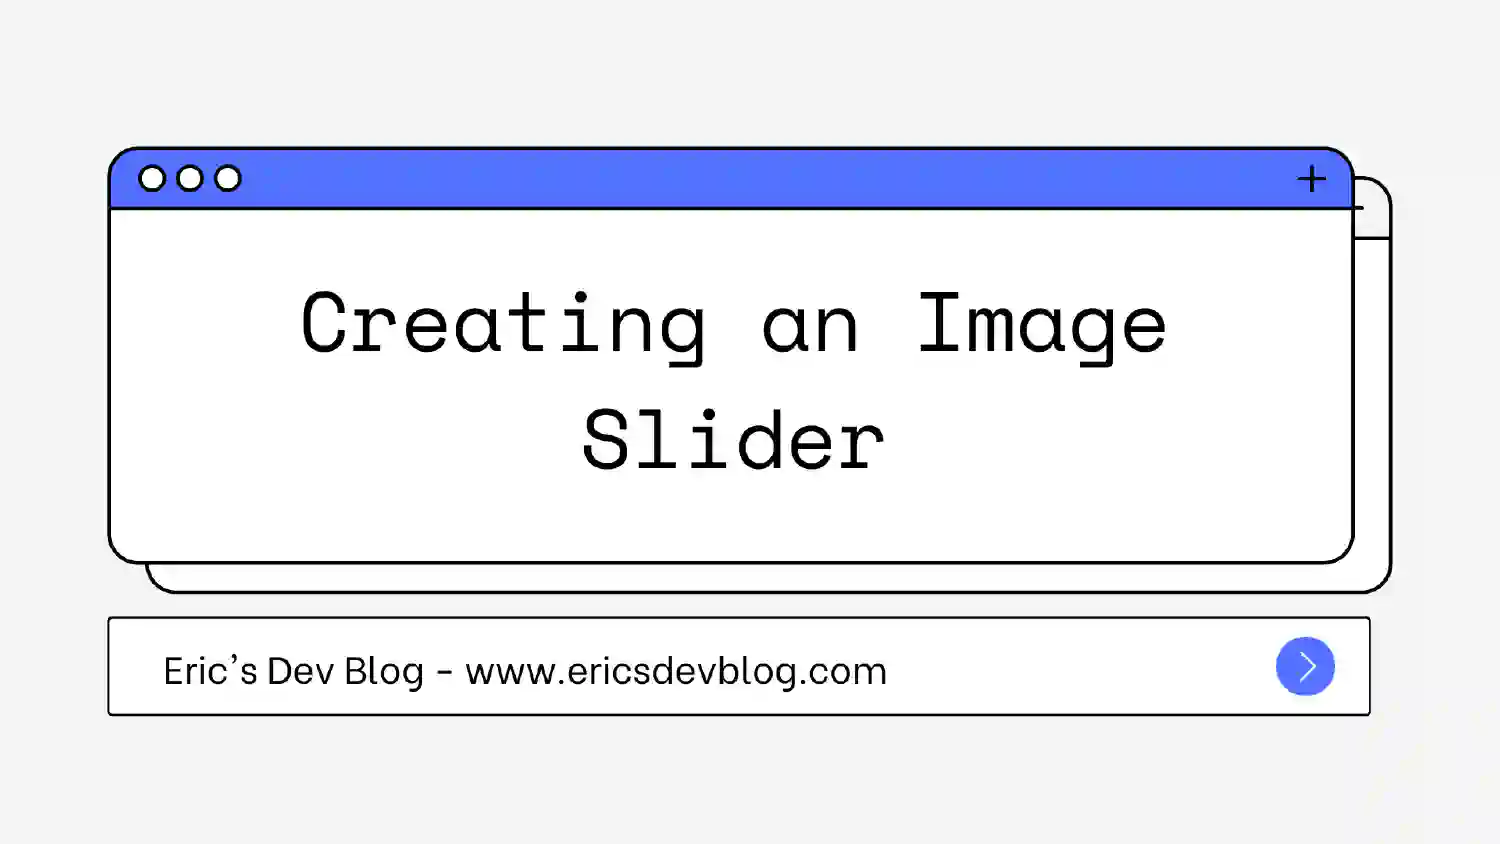 Creating an Image Slider with HTML, CSS, and JavaScript